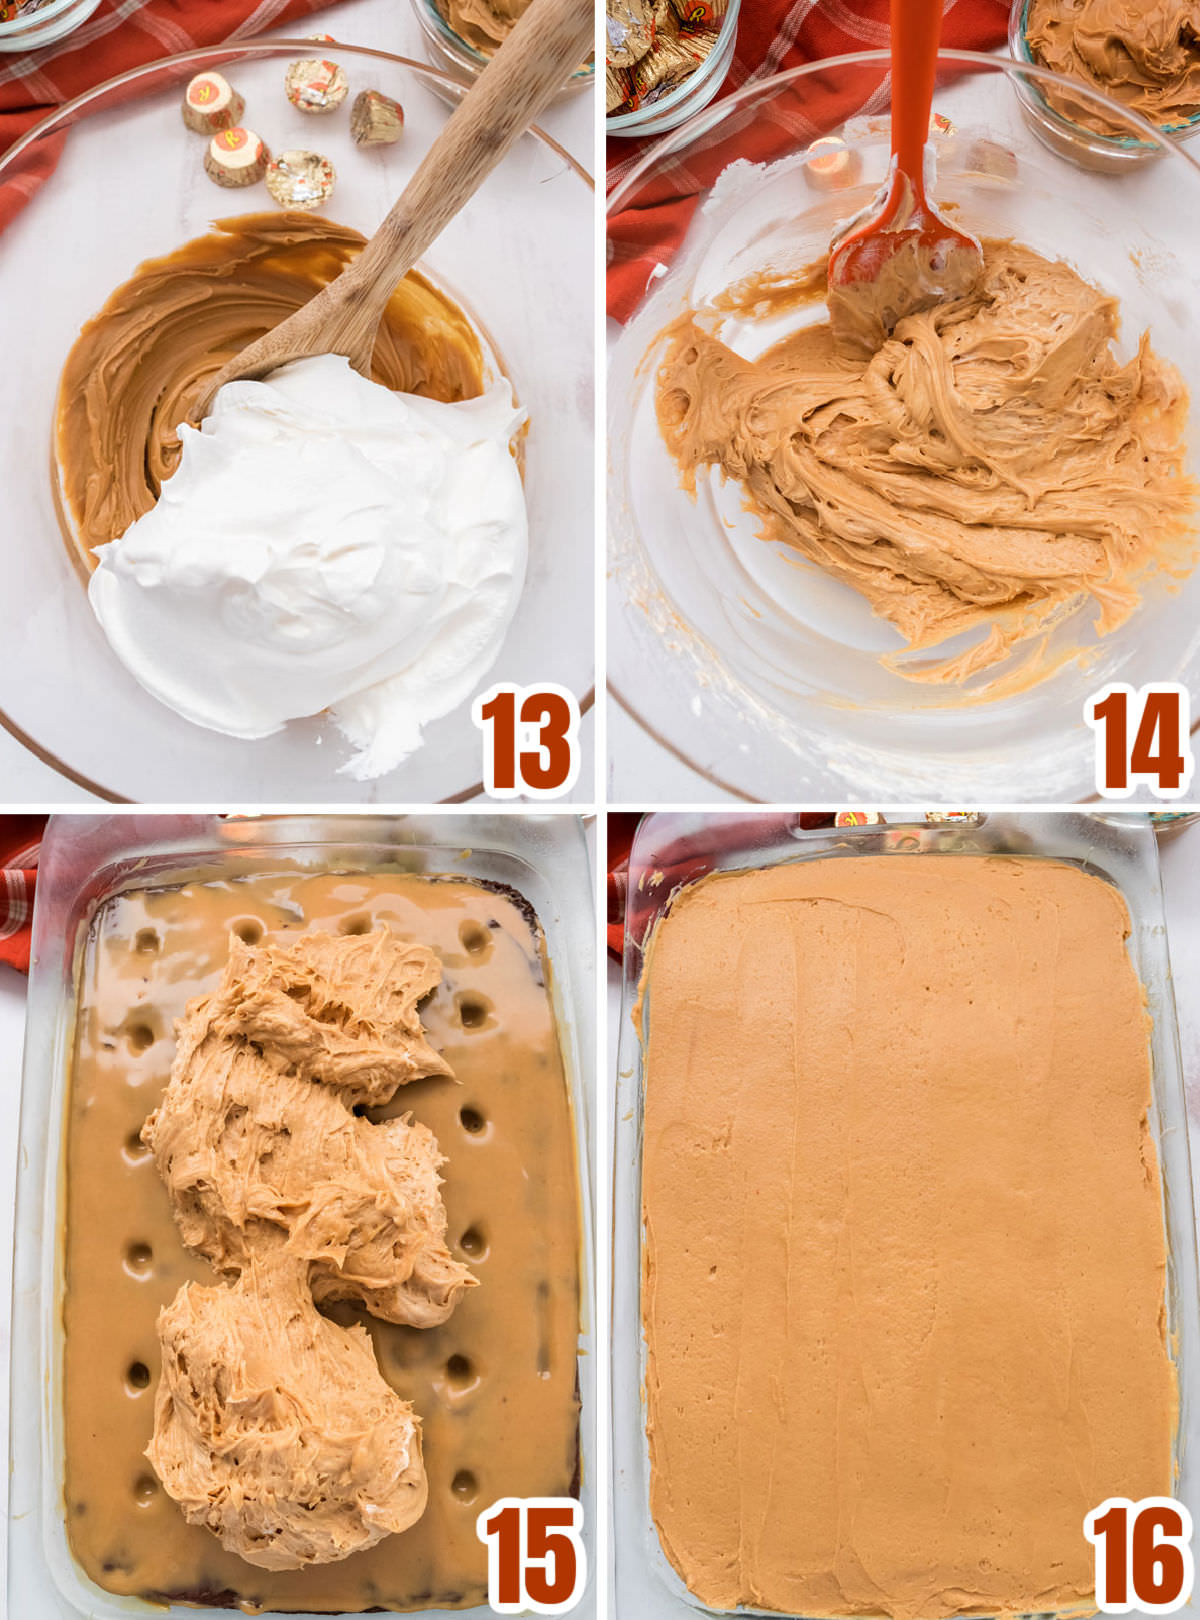 Collage image showing how to make a whipped Peanut Butter topping and use it to frost the Chocolate Poke Cake.